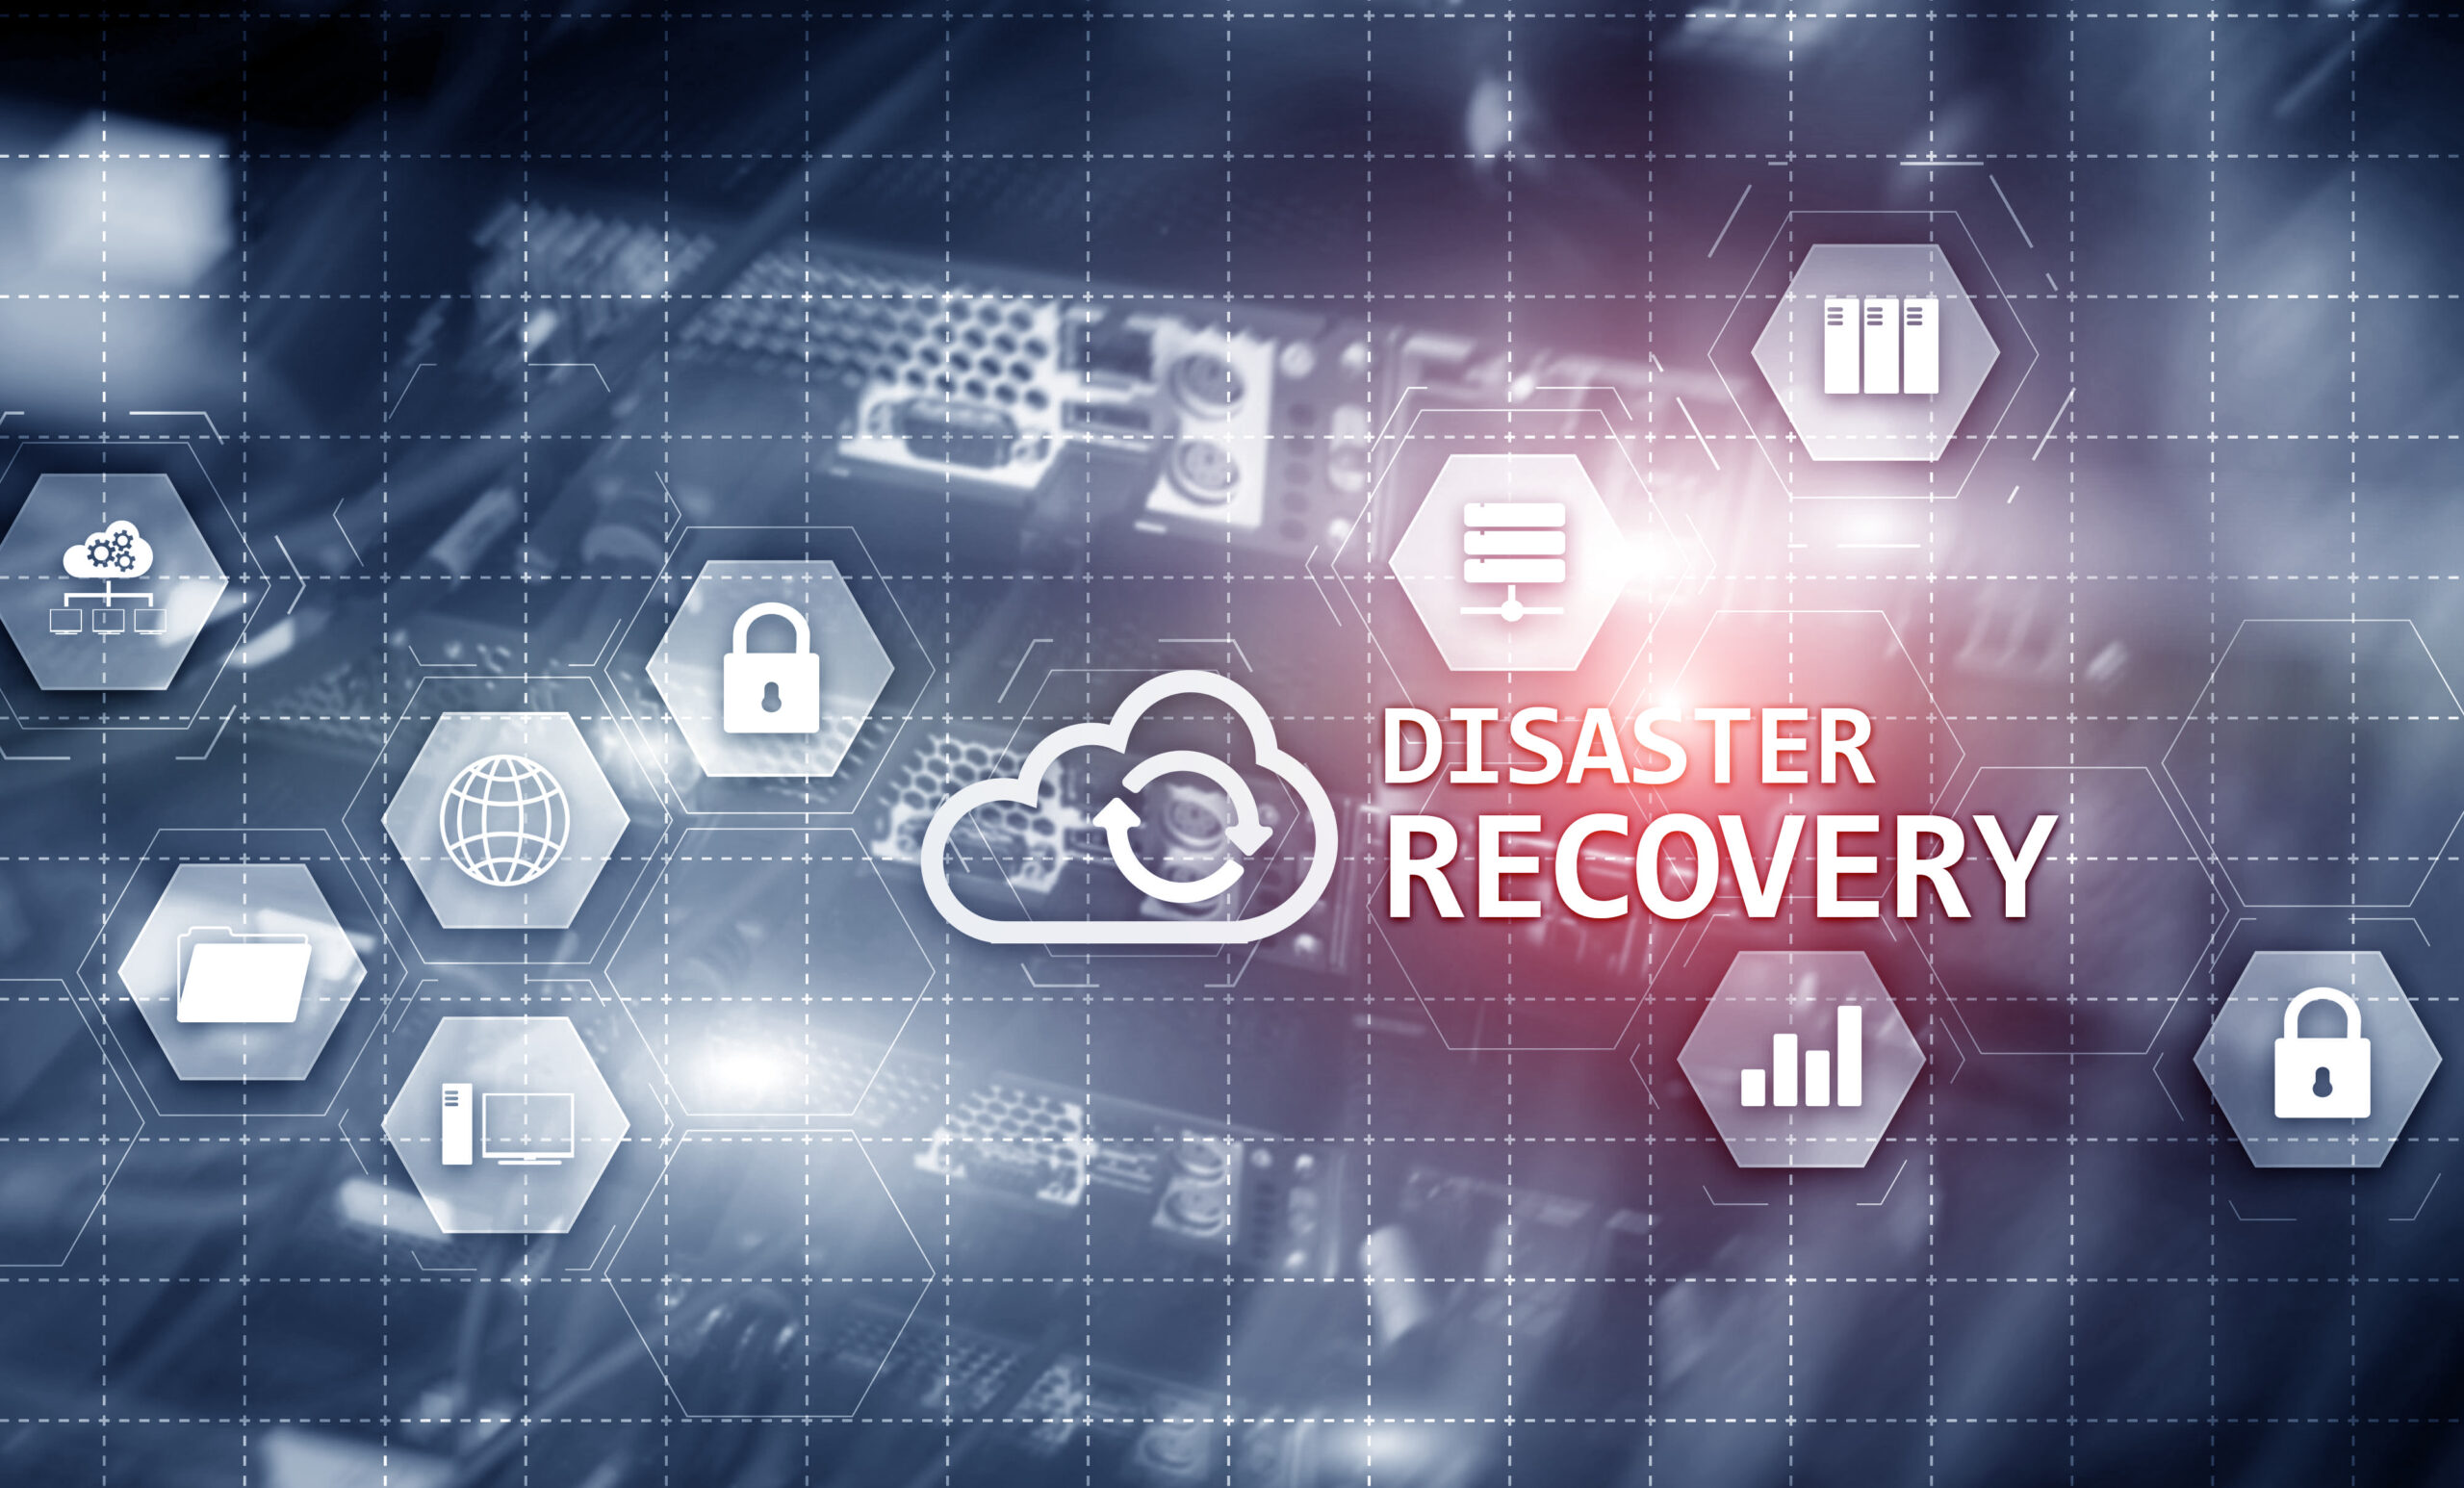 Digital grid highlighting disaster recovery icons with an emphasis on cloud storage and protection.